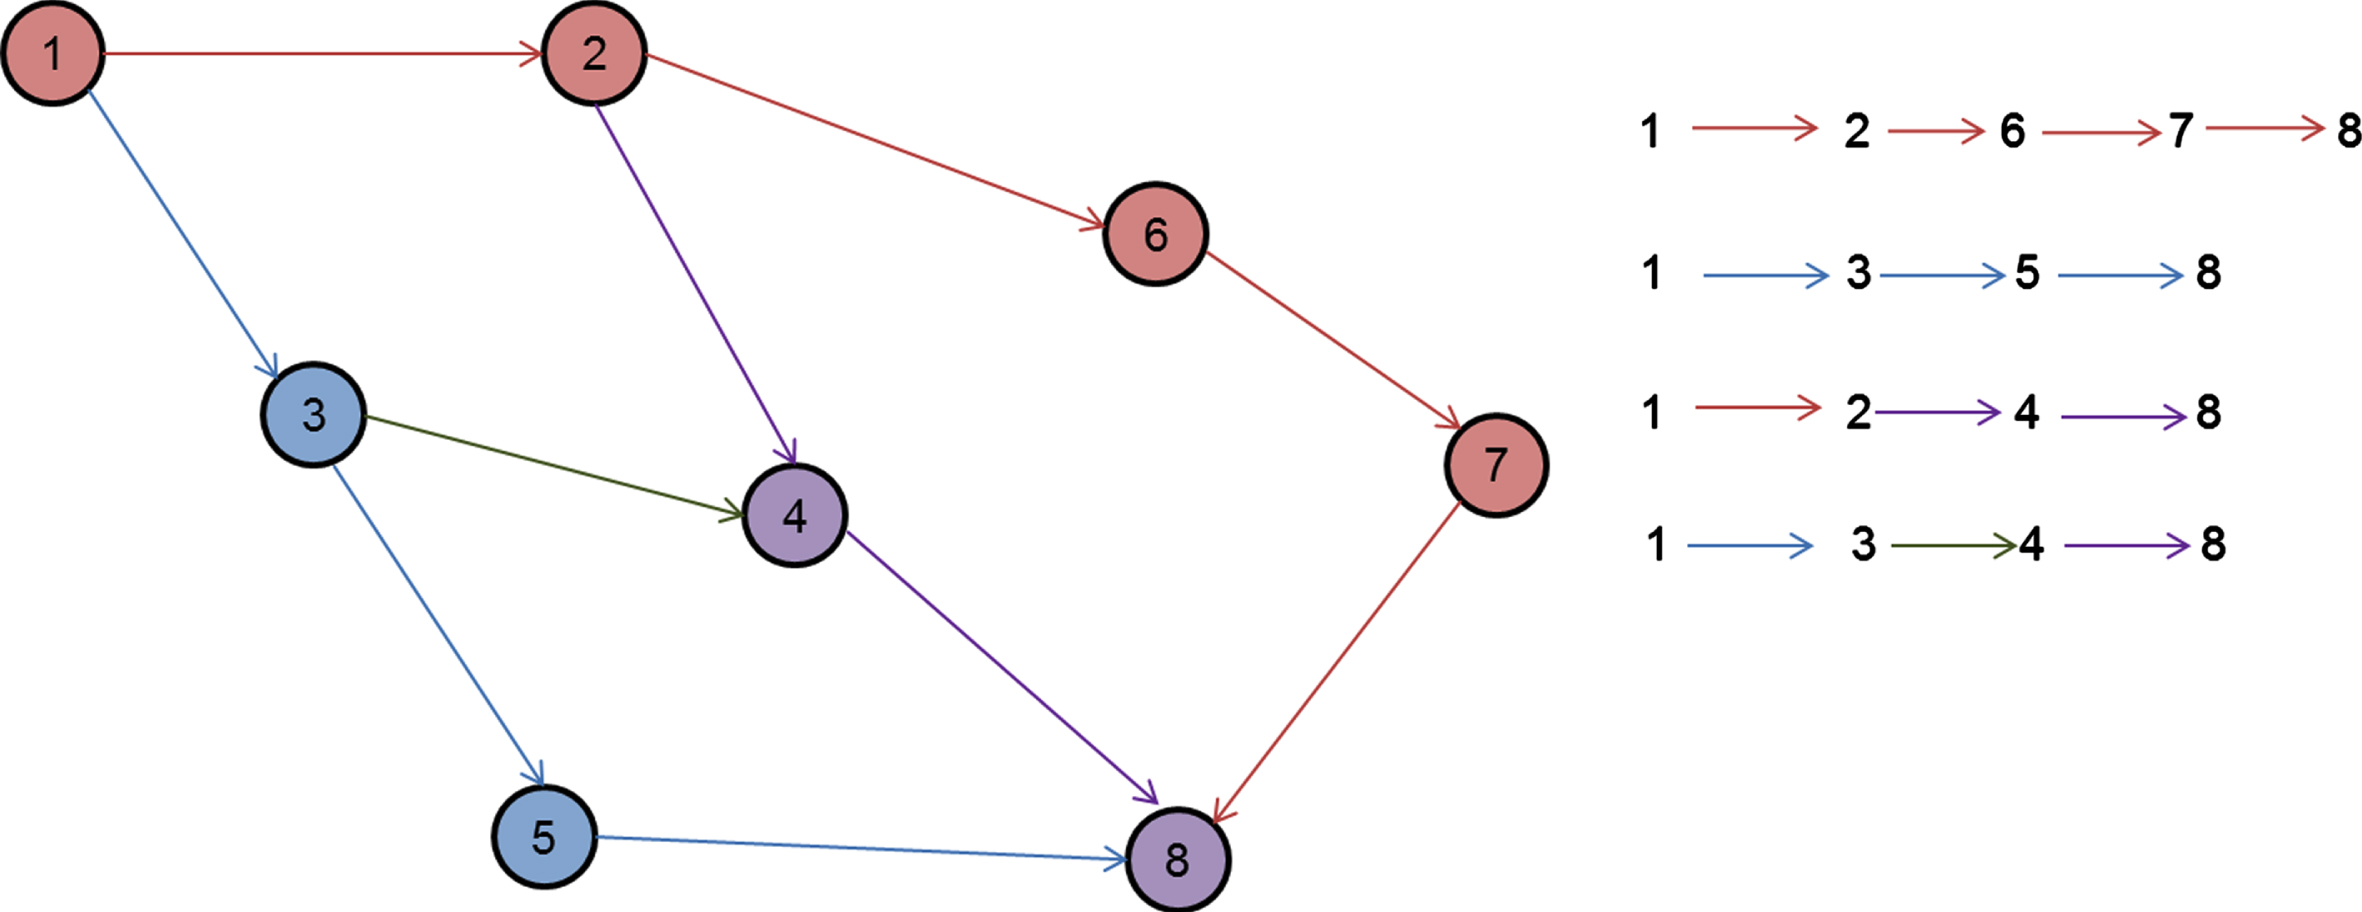 Typical network diagram for representing proposed routing protocol.